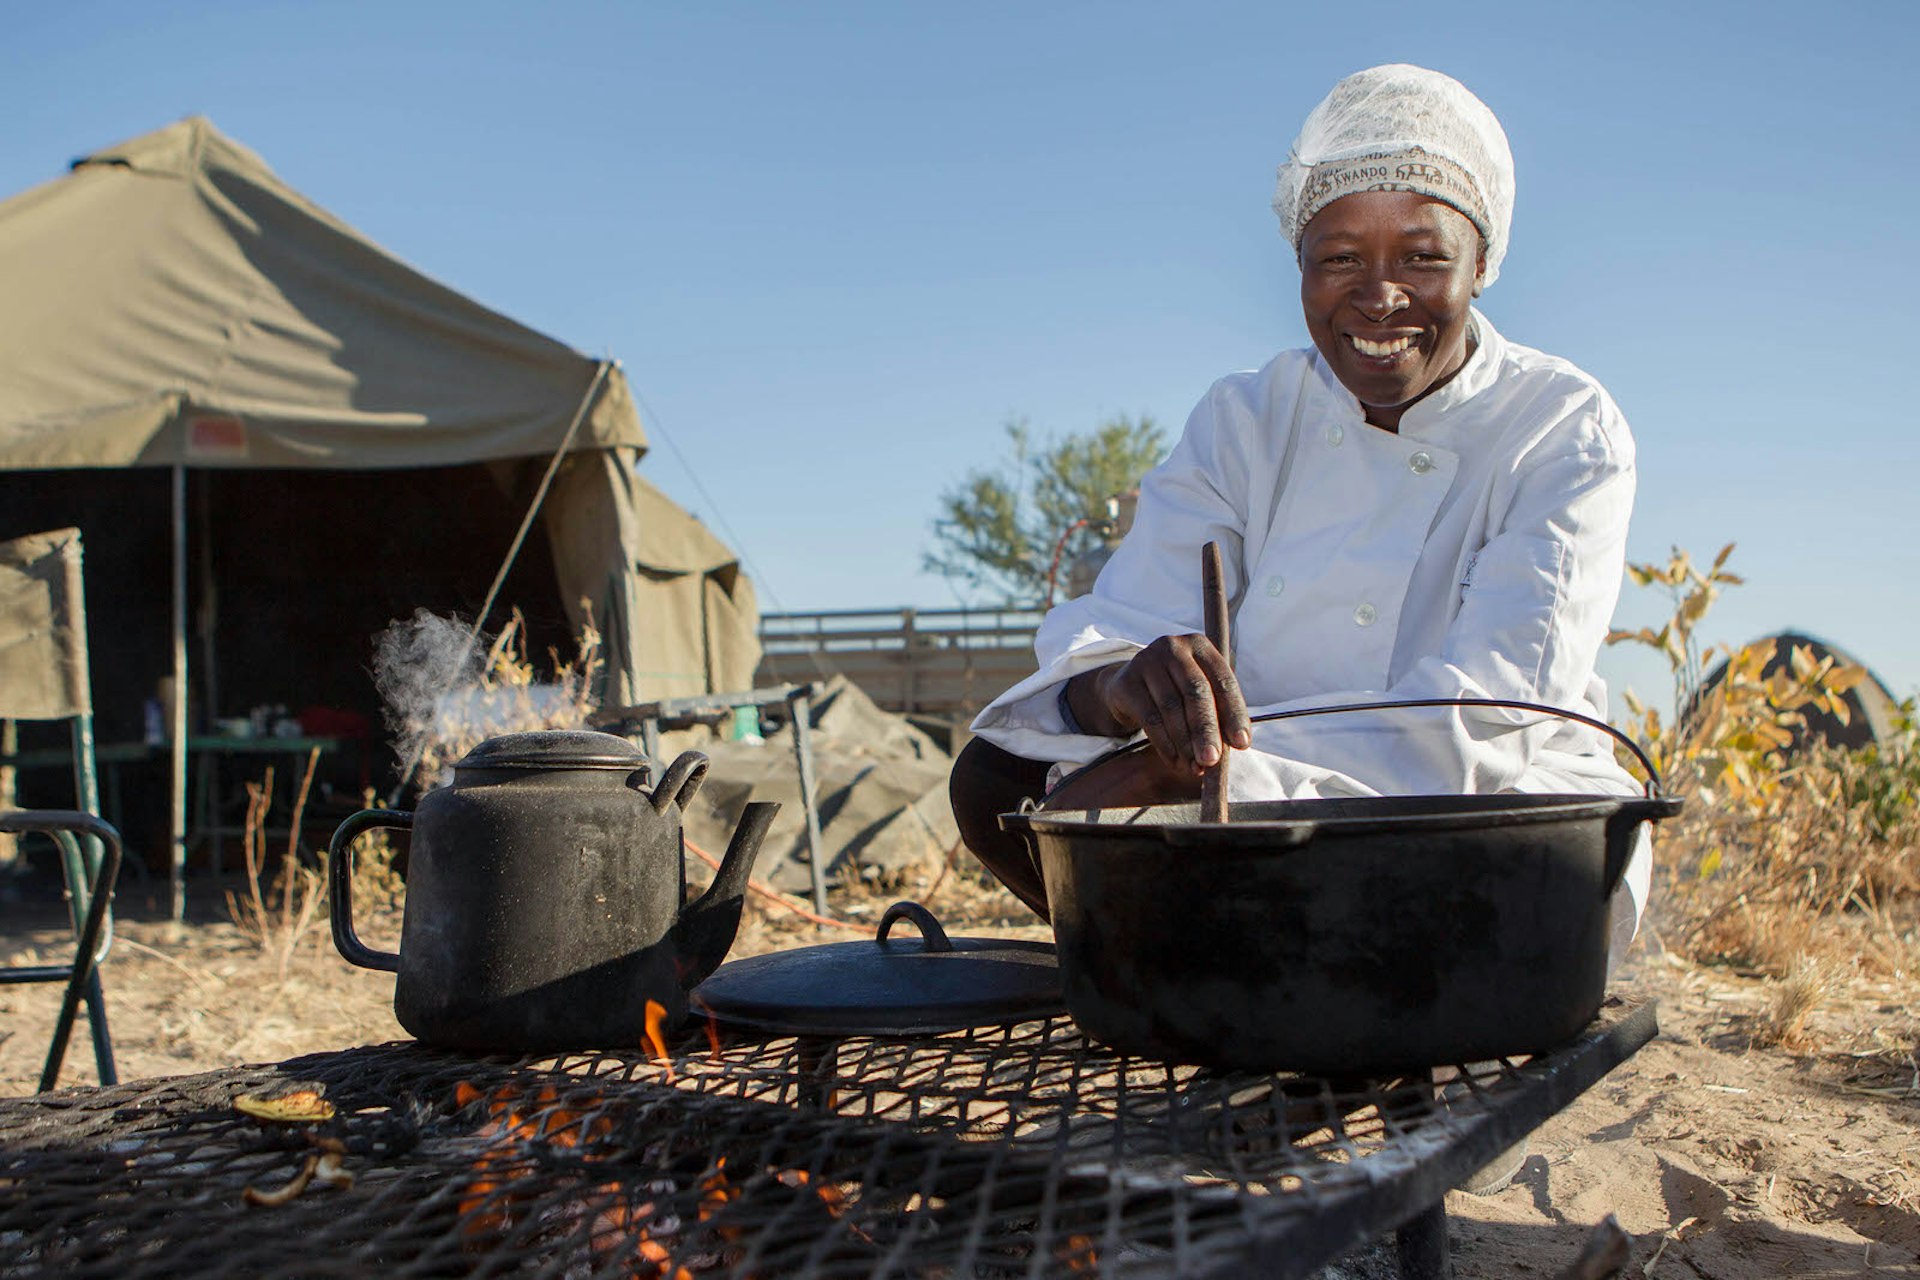 A smiling Botswanan chef, dressed in whites, crouches over a crockpot cooking over a fire in a mobile safari camp, with the portable tents seen in the background © James Gifford / Lonely Planet